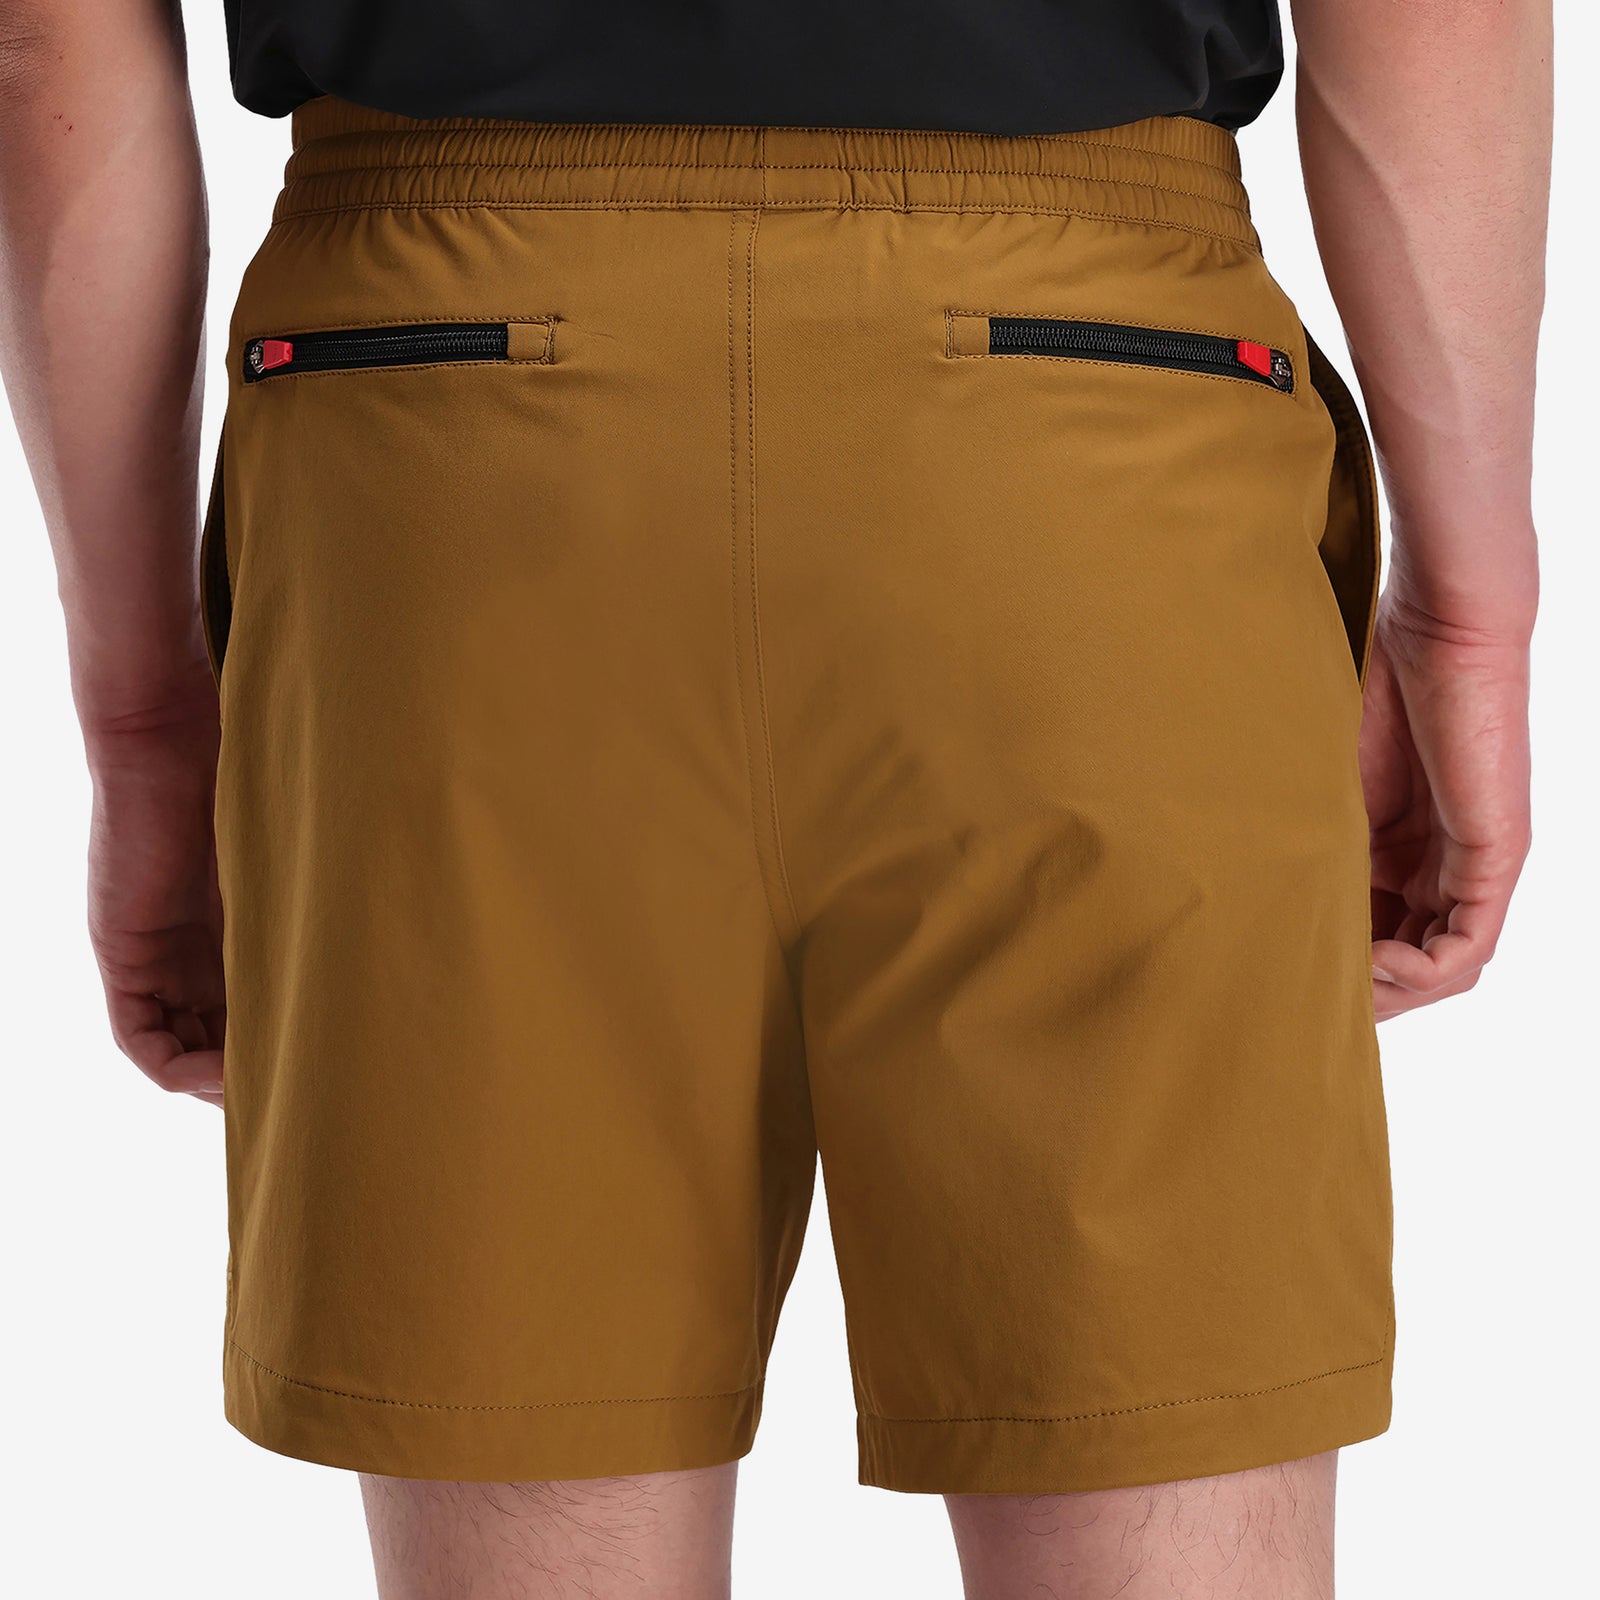 General on model photo of back zipper pockets on Topo Designs Men's Global lightweight quick dry travel Shorts.